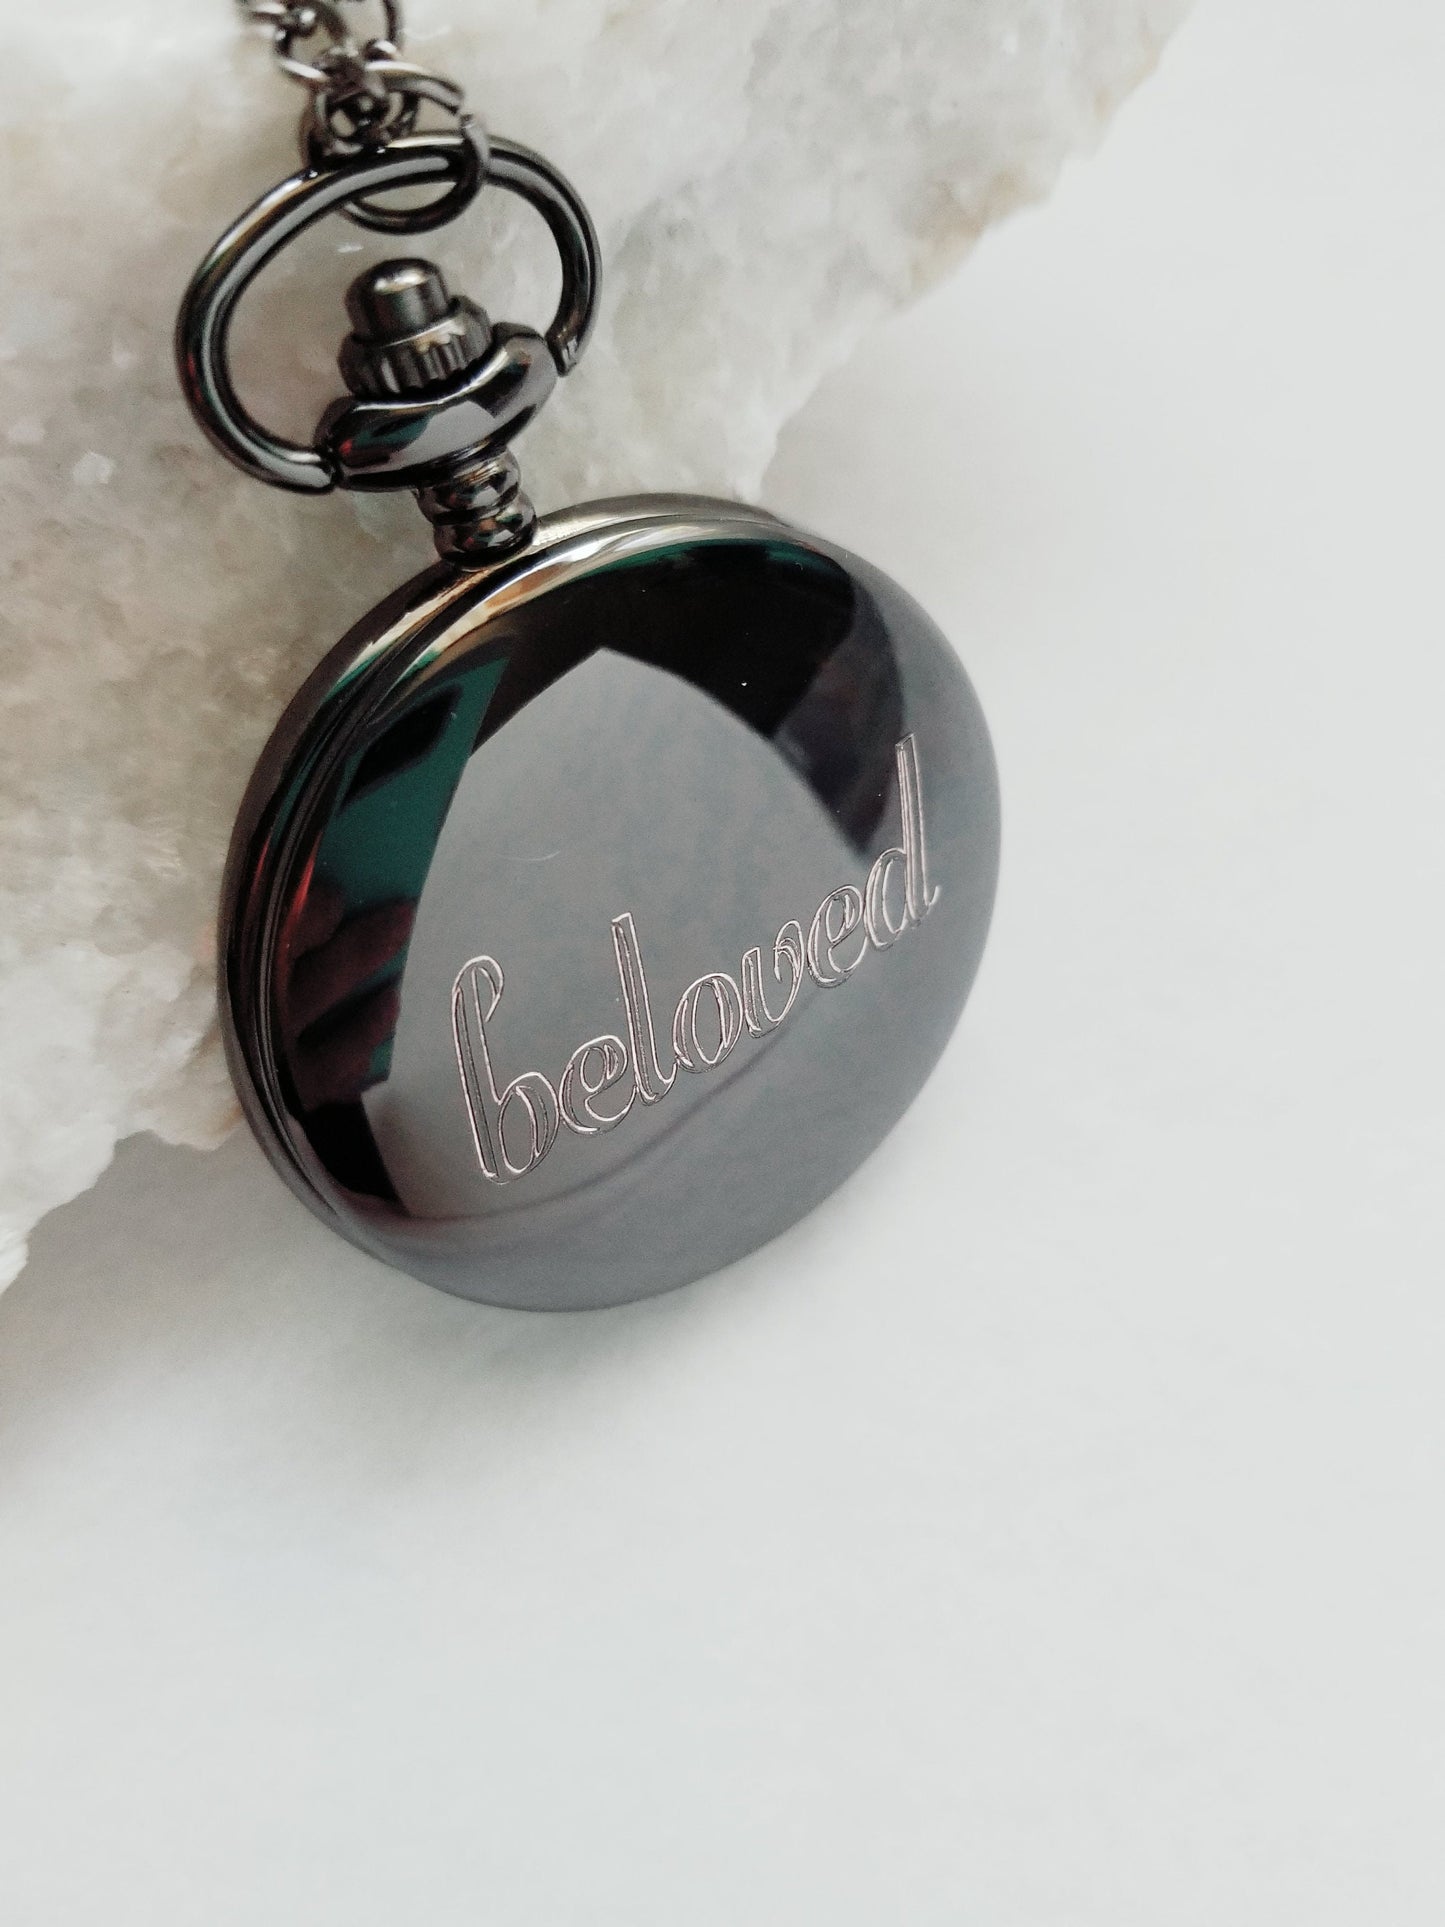 Actual Hand writing engraved on a pocket watch